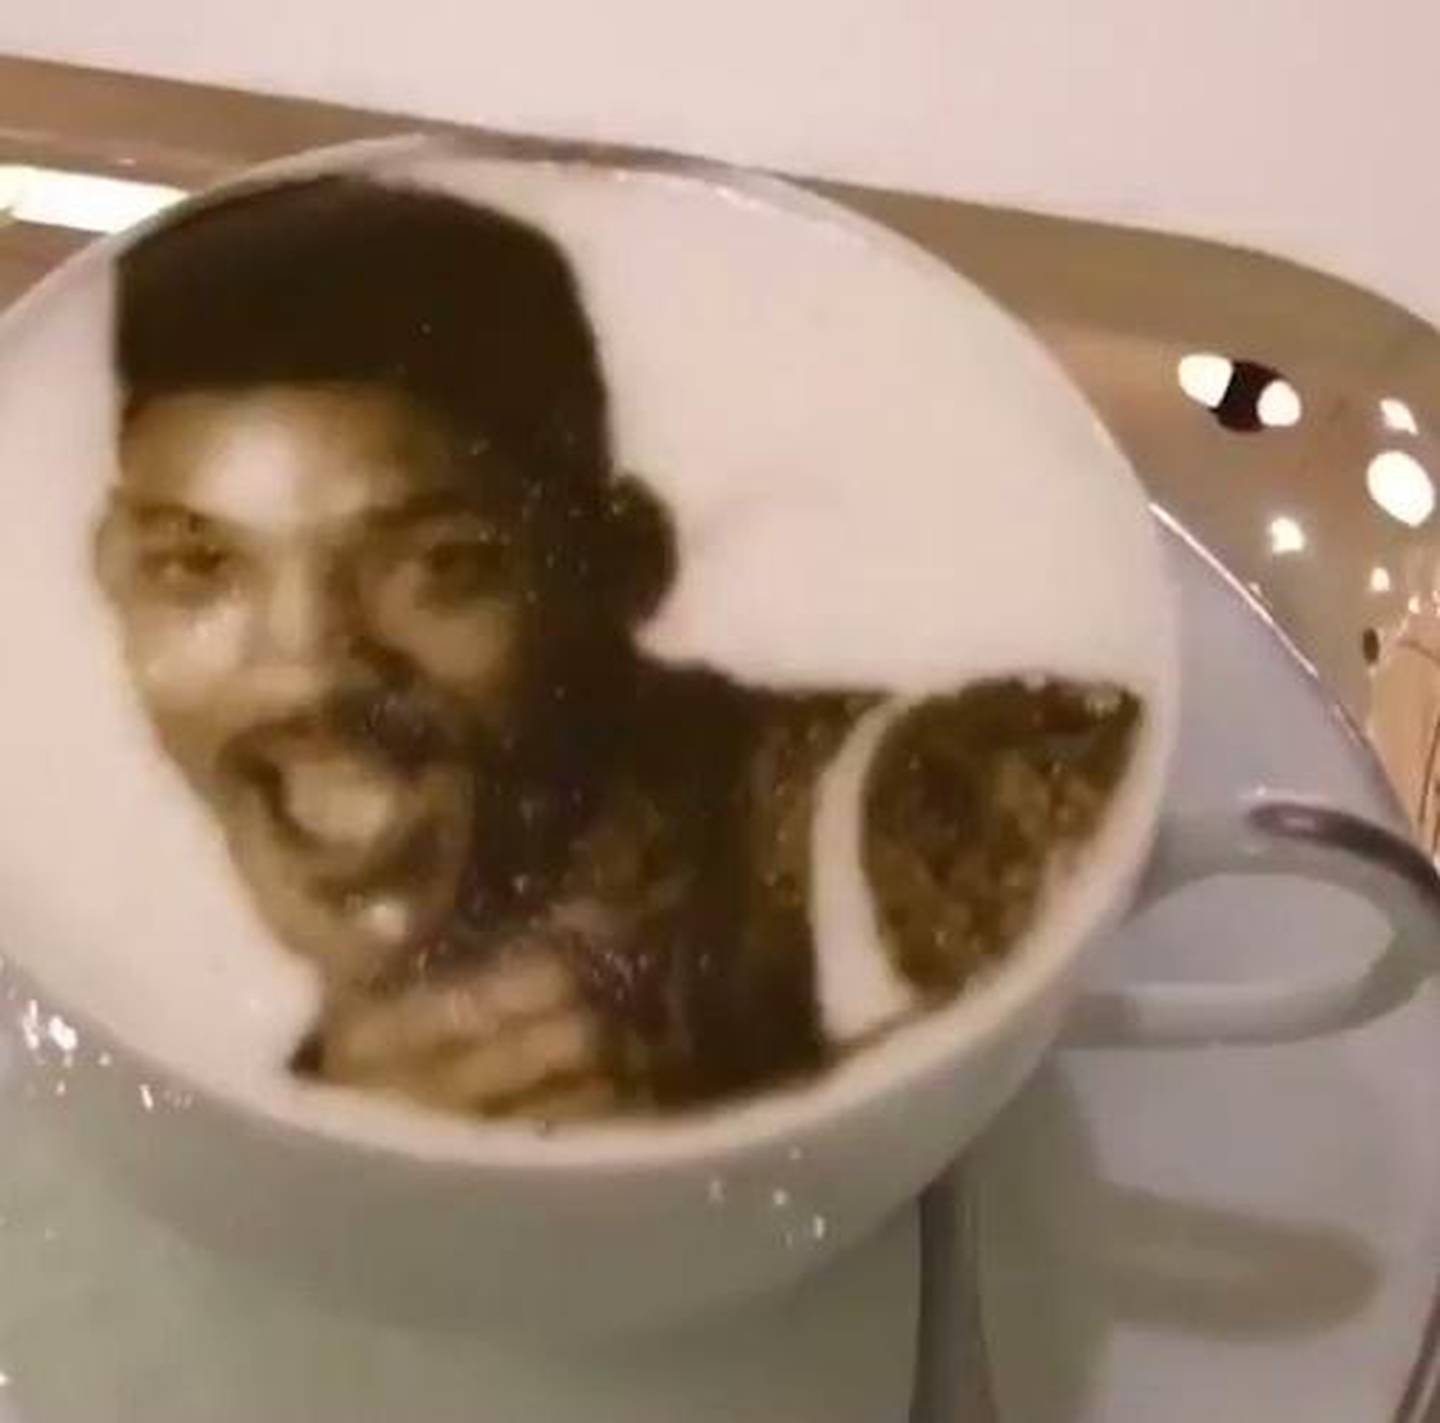 Will Smith has also had a personalised coffee at Jetex. Instagram / Will Smith